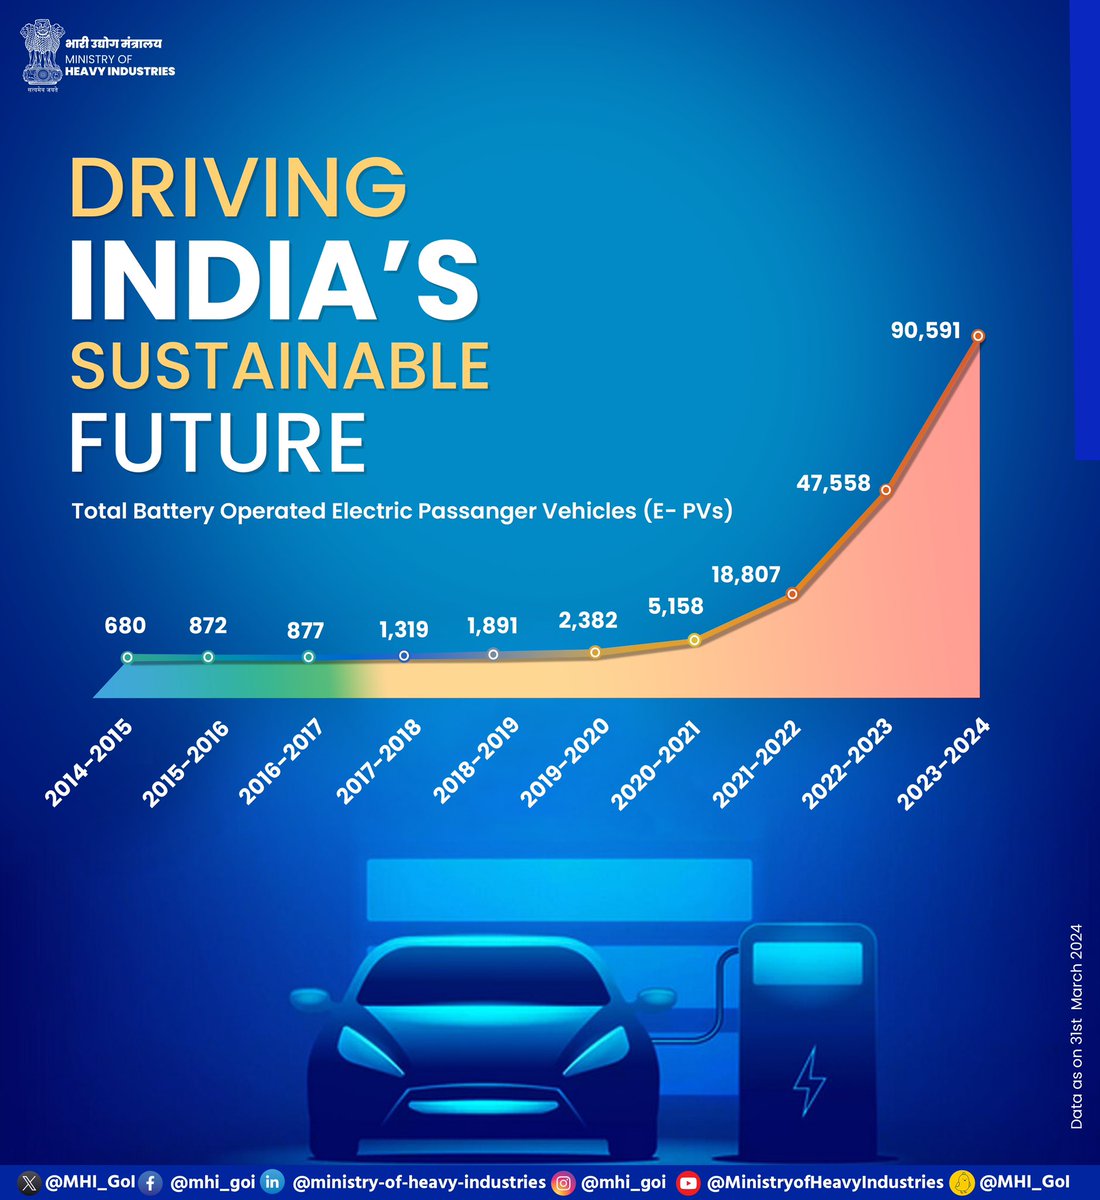 India's surging demand for battery-operated Passenger Vehicles (PVs) is driving the EV industry's growth. With an impressive 72.21% CAGR as shown, it underscores the essential role of expanding E-PVs in shaping India's environmental, economic, societal, and global future. 🌱🚗